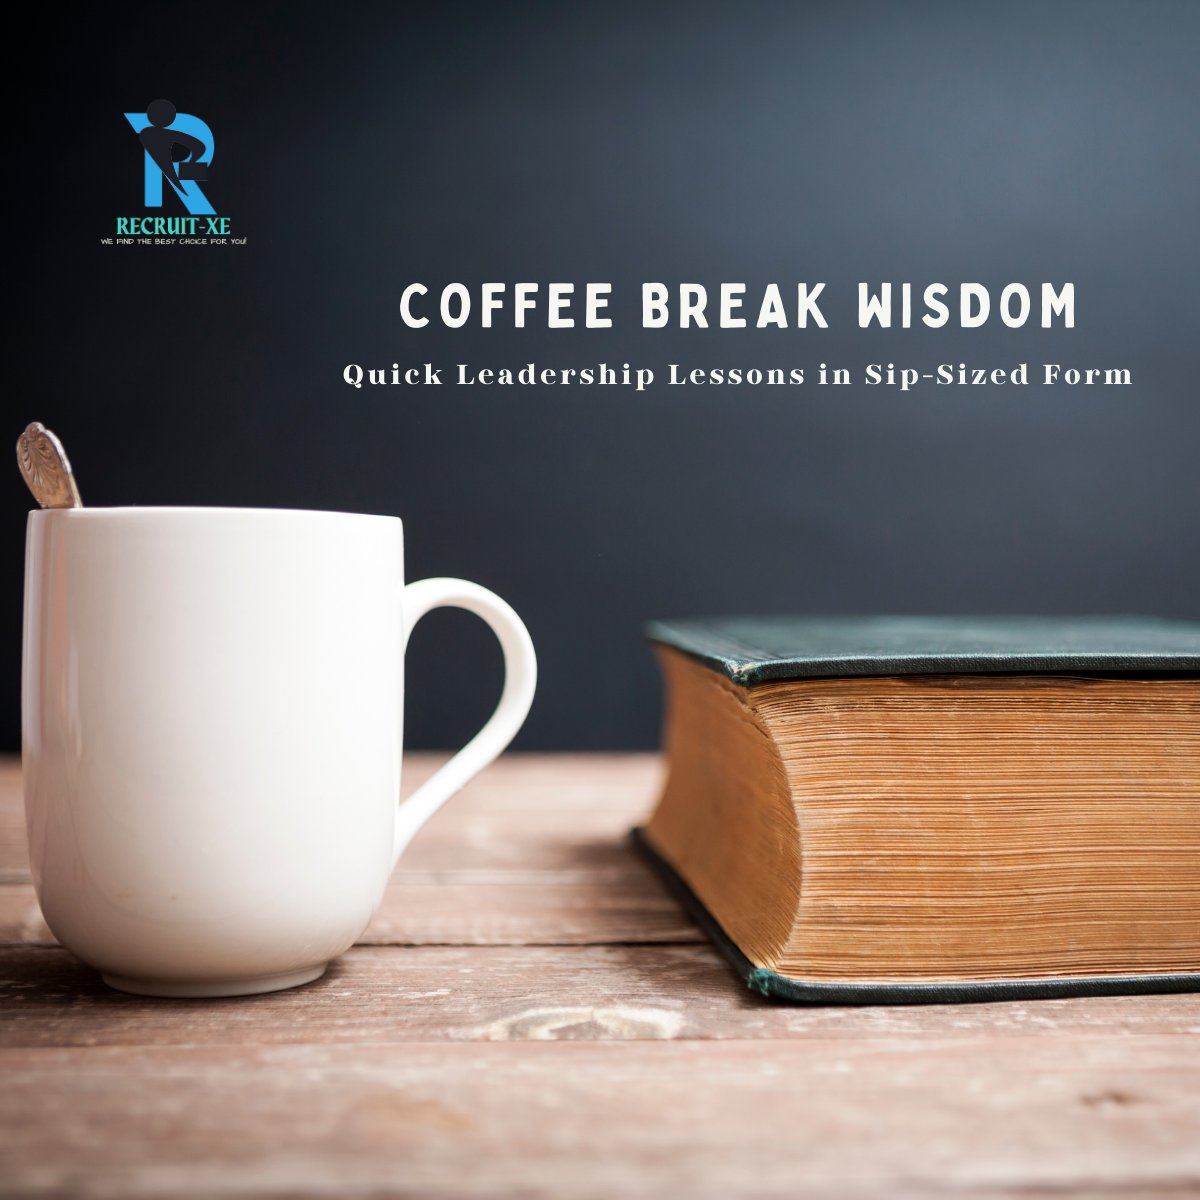 Leadership is not about being in charge; it’s about taking care of those in your charge. #CoffeeBreakWisdom #LeadershipLessons #ListenLearnLead #EmbraceFailure #AuthenticLeadership